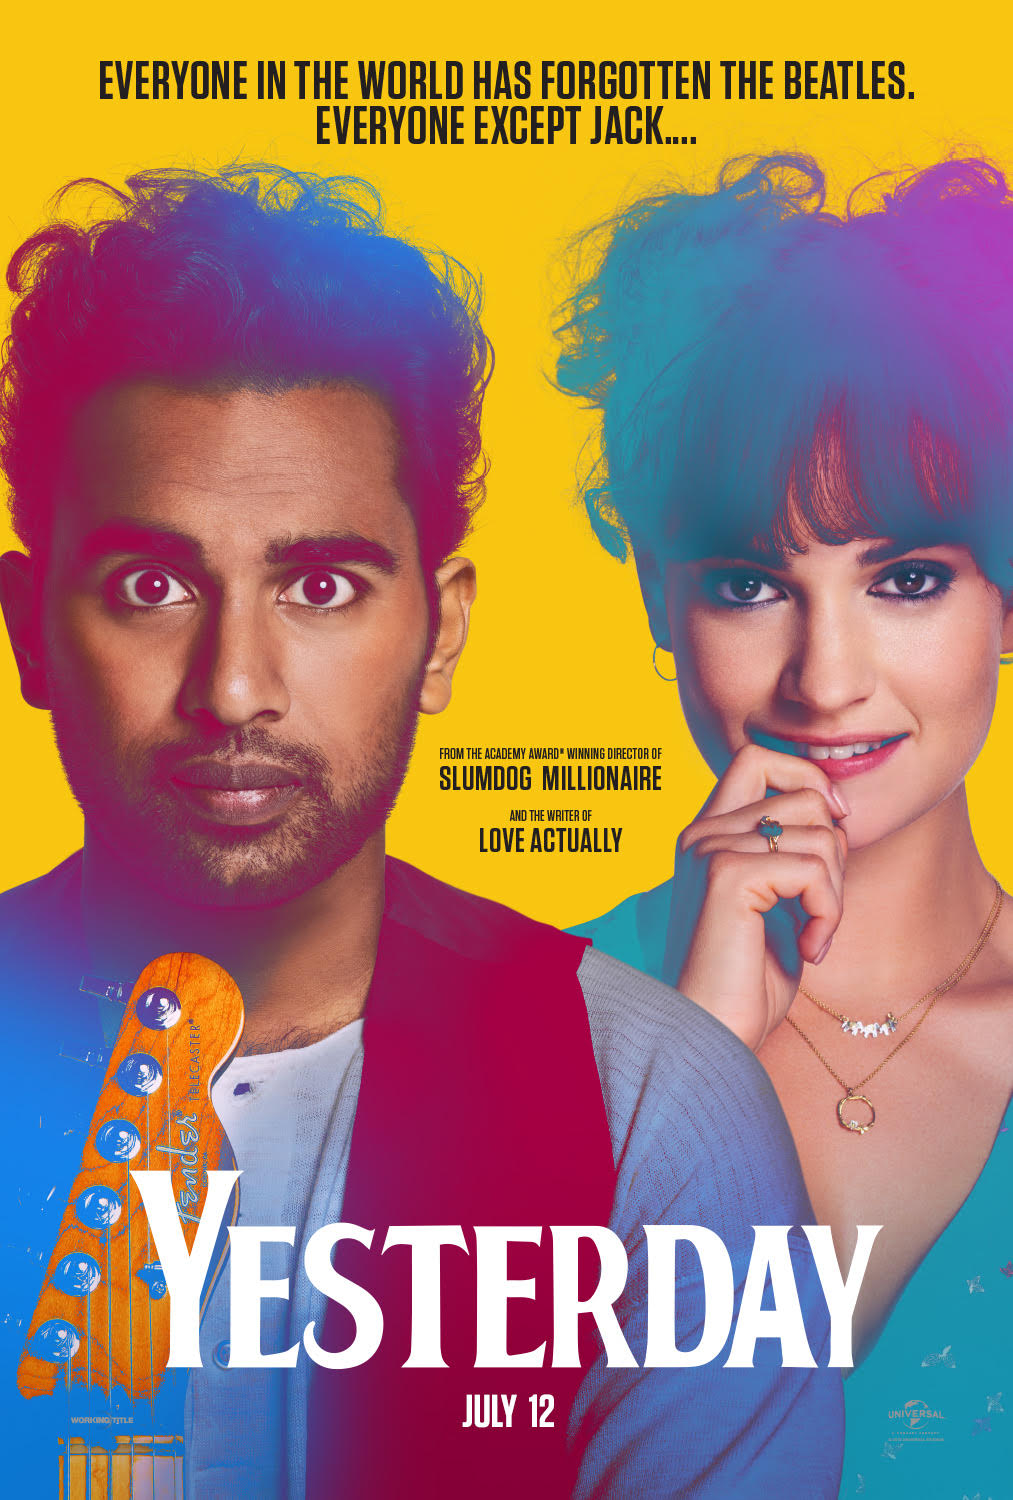 Yesterday Review: Himesh Patel &amp; Lily James concoct a pleasing love story with The Beatles&#039; nostalgia